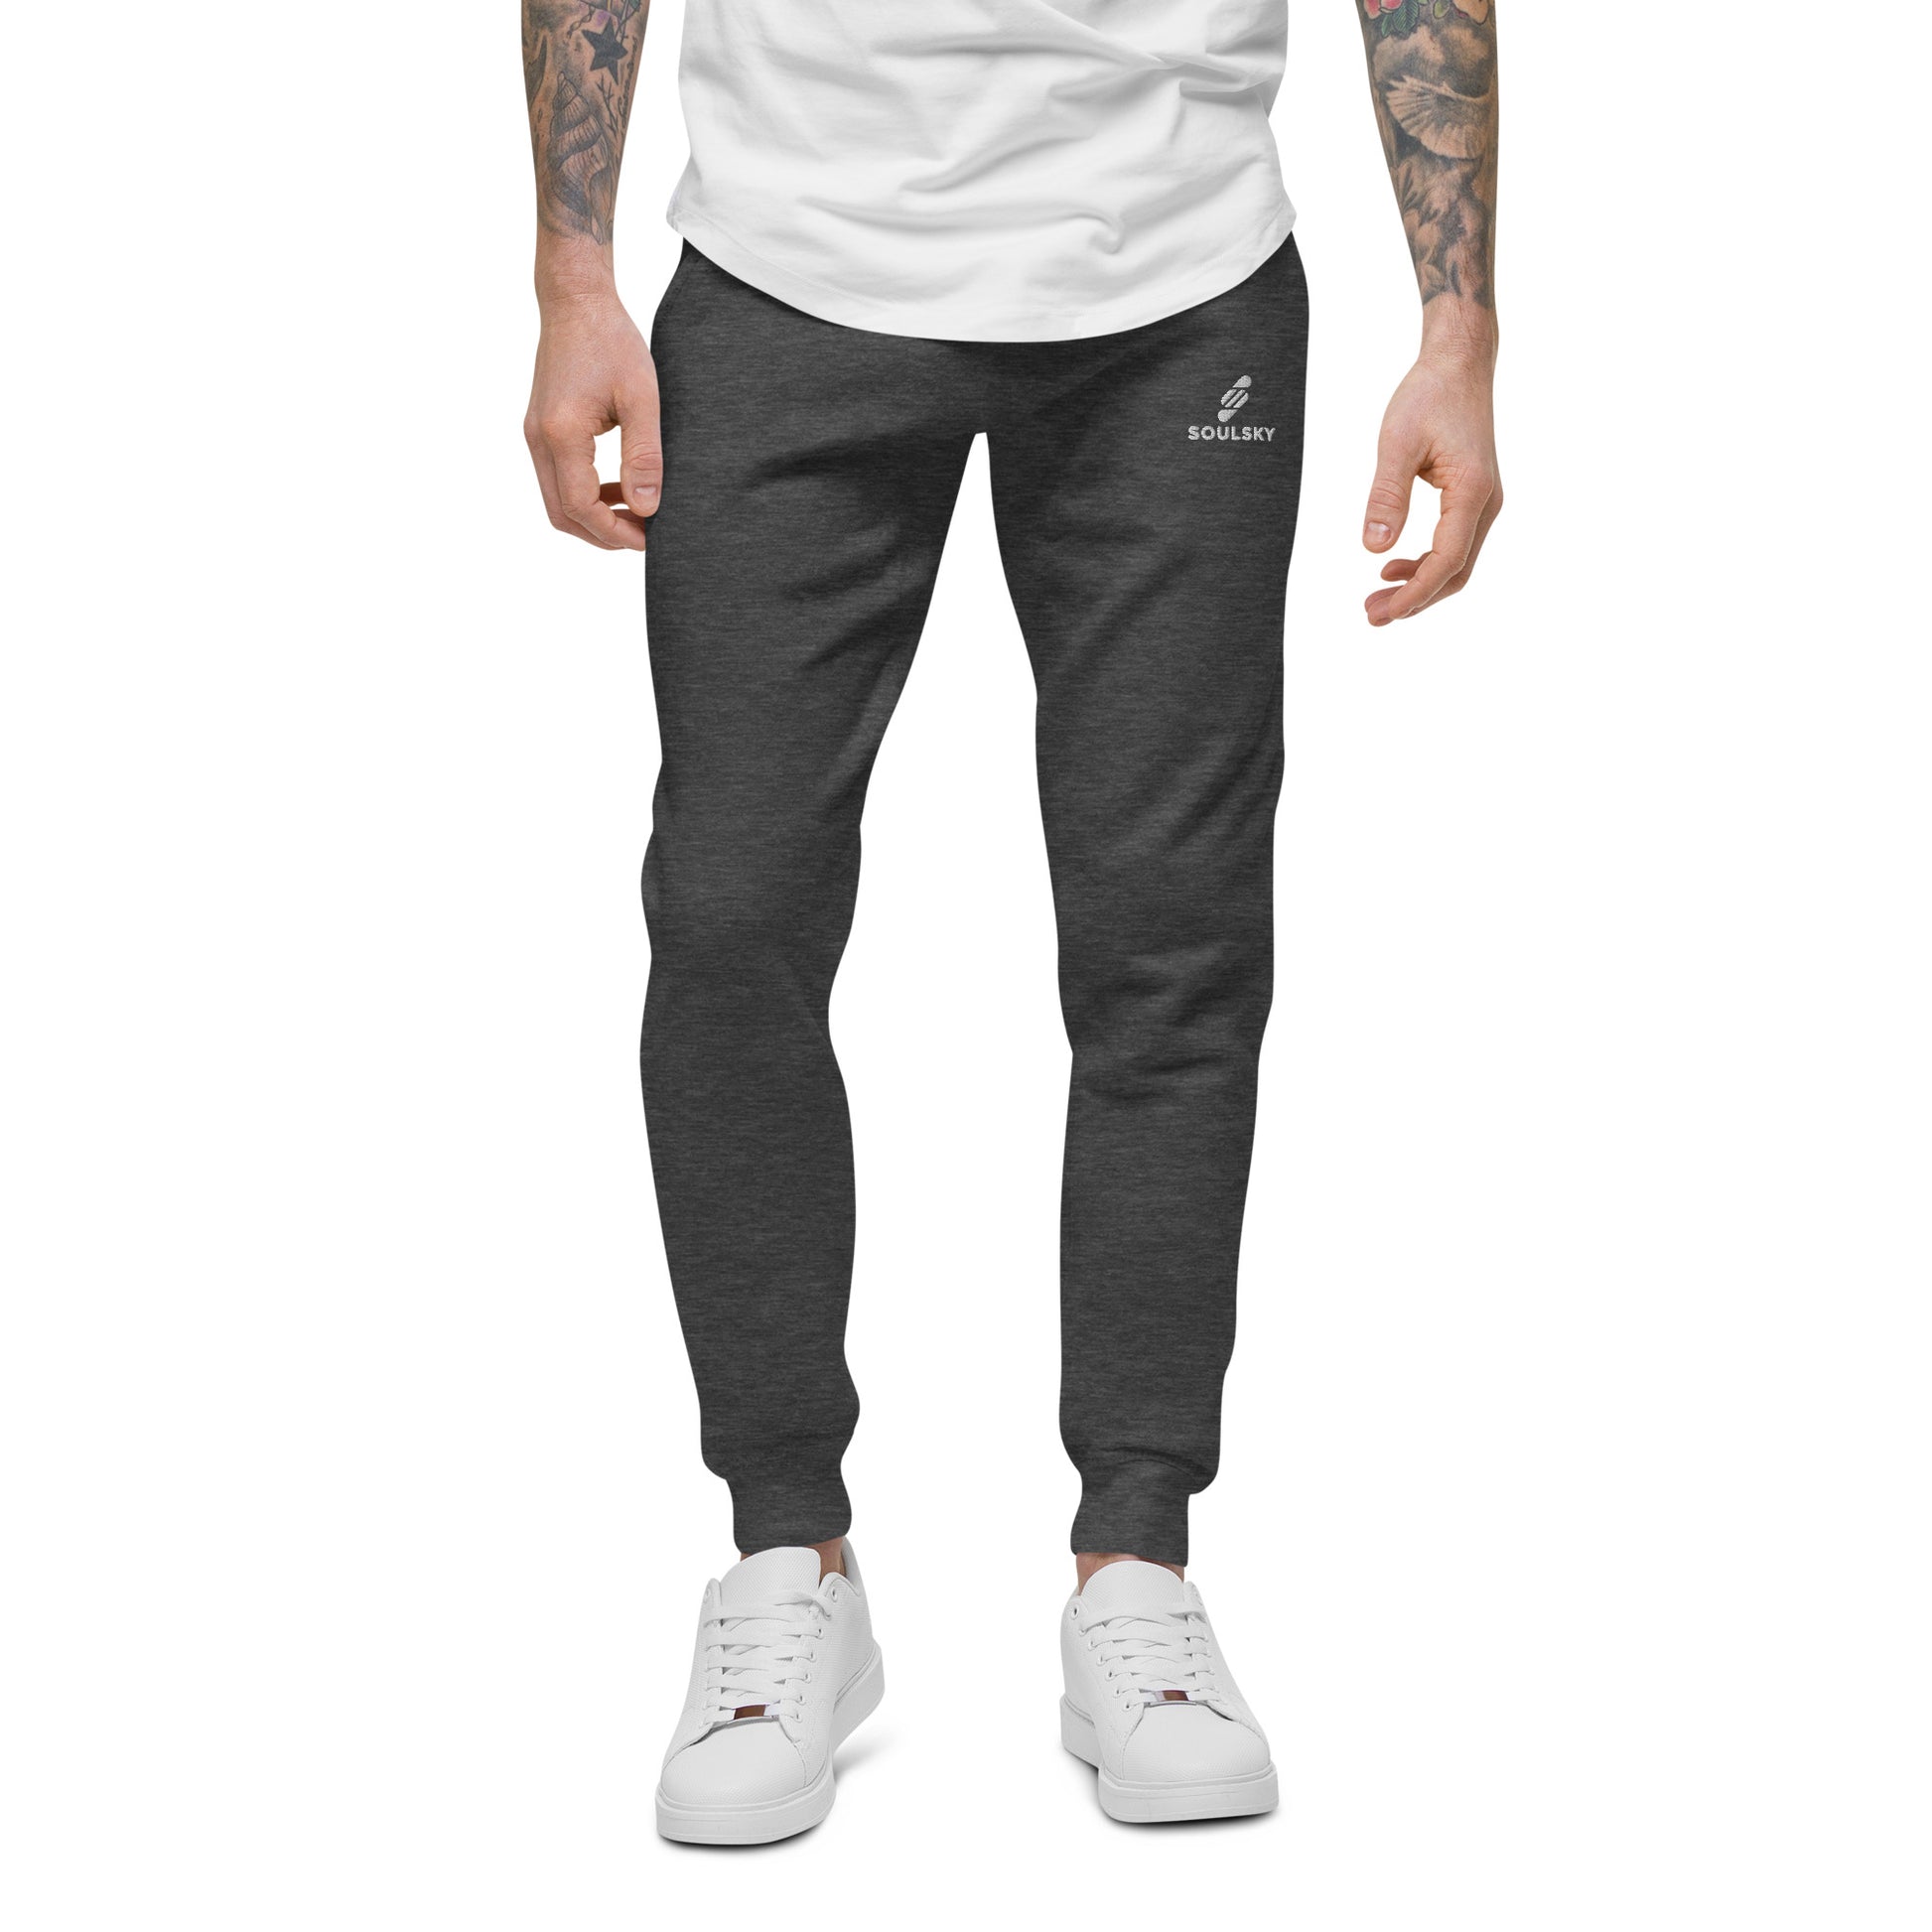 Male model wearing charcoal gray heather unisex joggers with white embroidered logo on left thigh that says "SOULSKY".